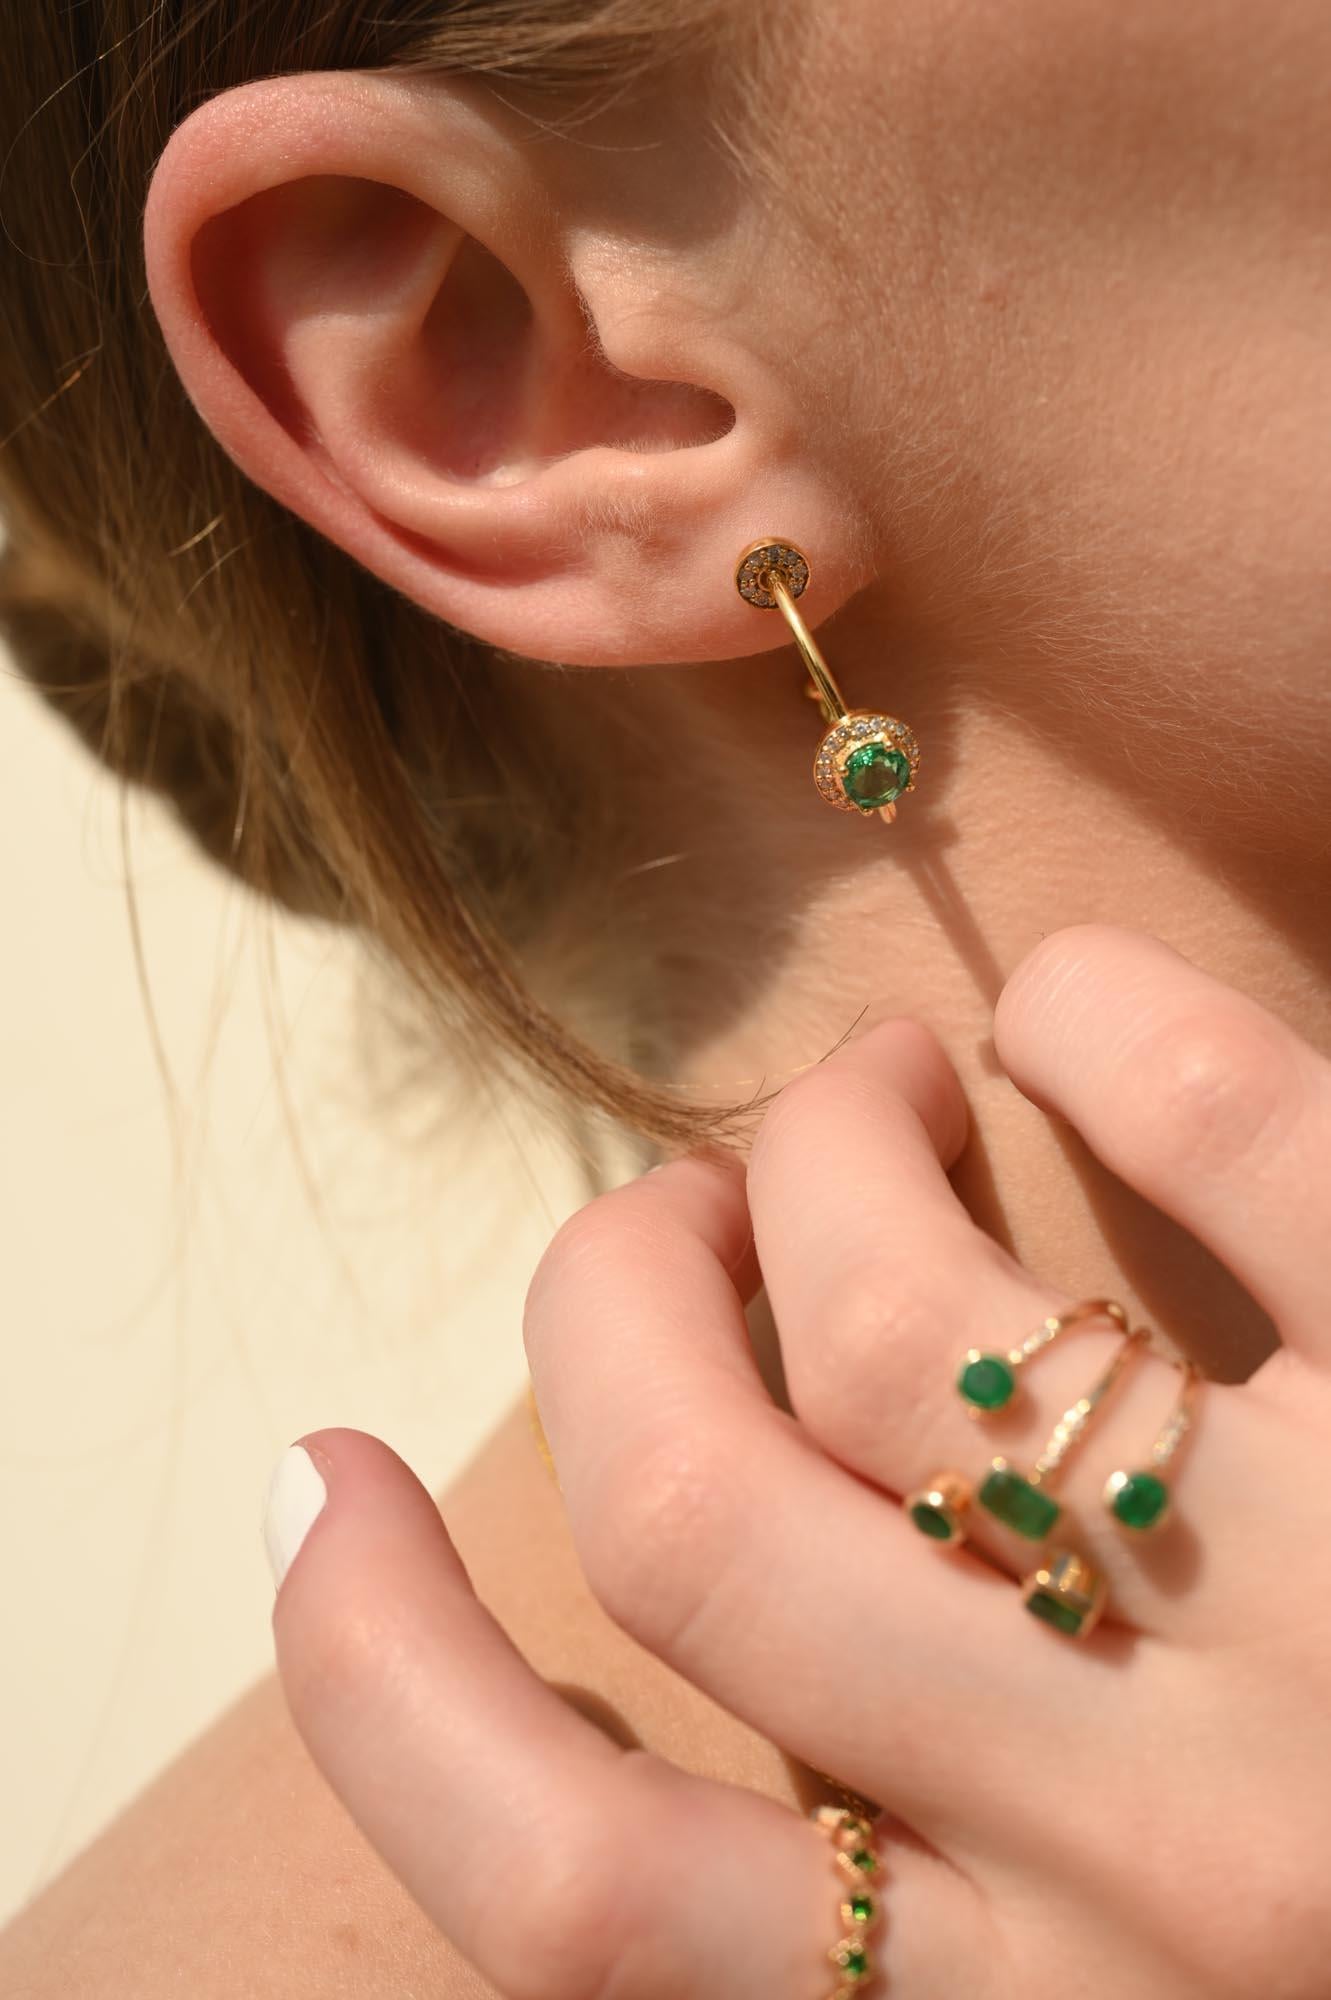 Halo Diamond and Emerald C-Hoop Earrings in 14K Gold to make a statement with your look. You shall need open hoop earrings to make a statement with your look. These earrings create a sparkling, luxurious look featuring round cut gemstone.
Emerald